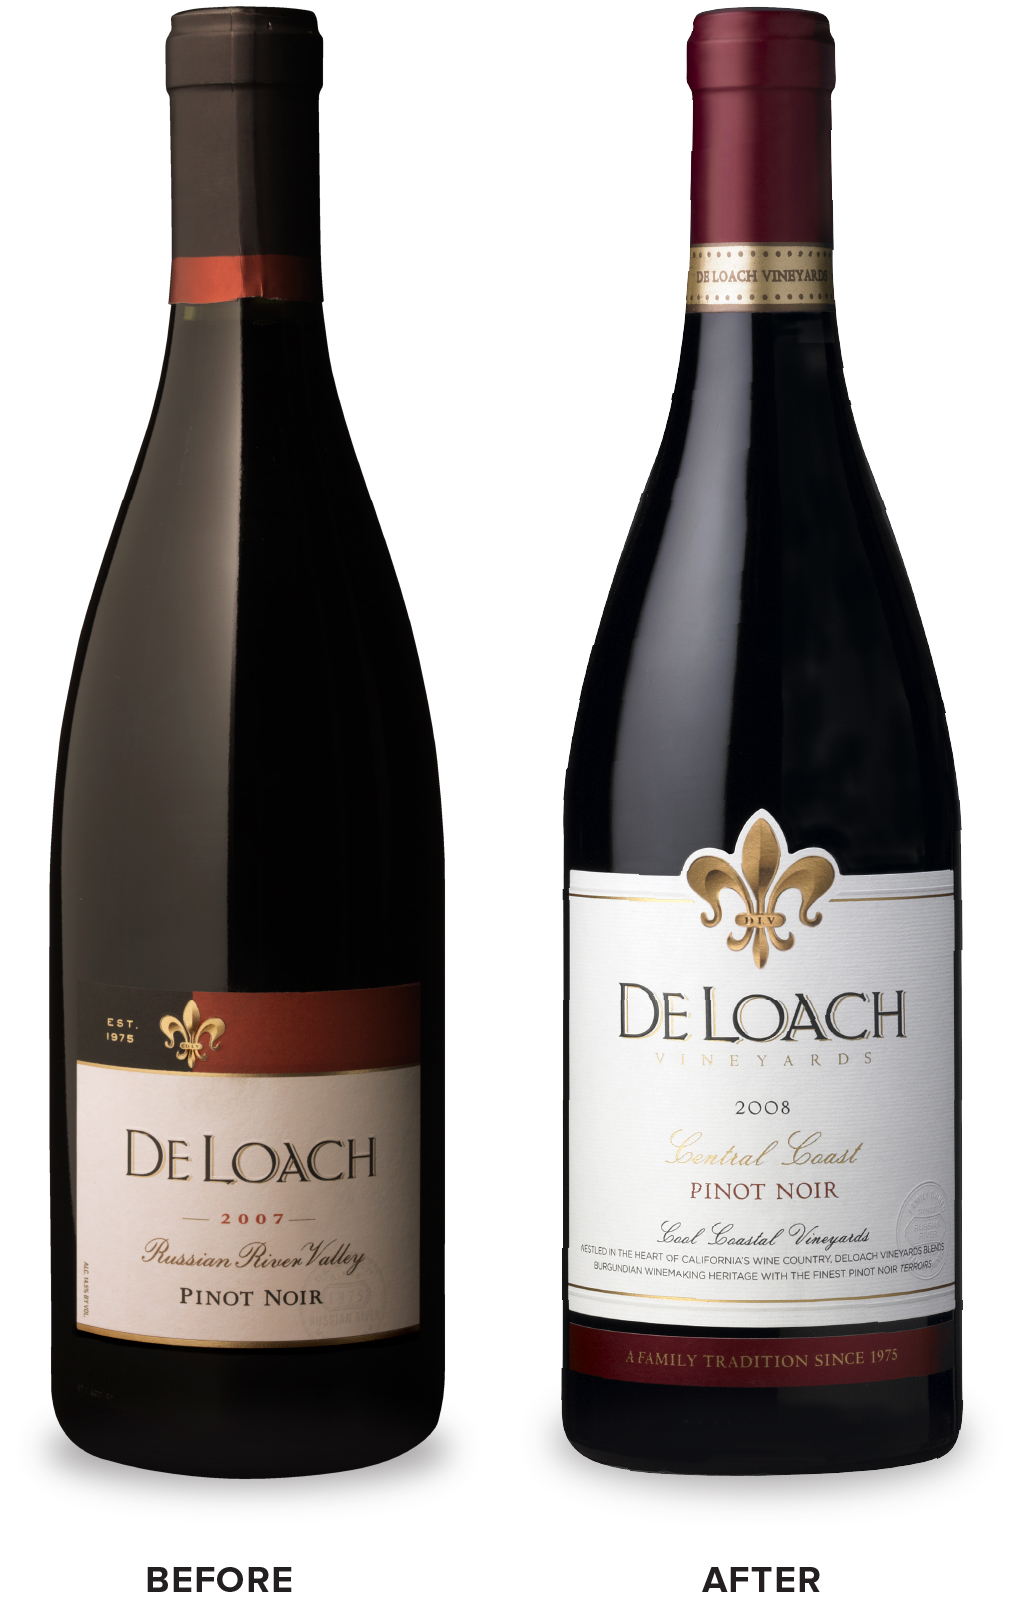 DeLoach Vineyards Central Coast Pinot Noir Wine Packaging Before Redesign on Left & After on Right